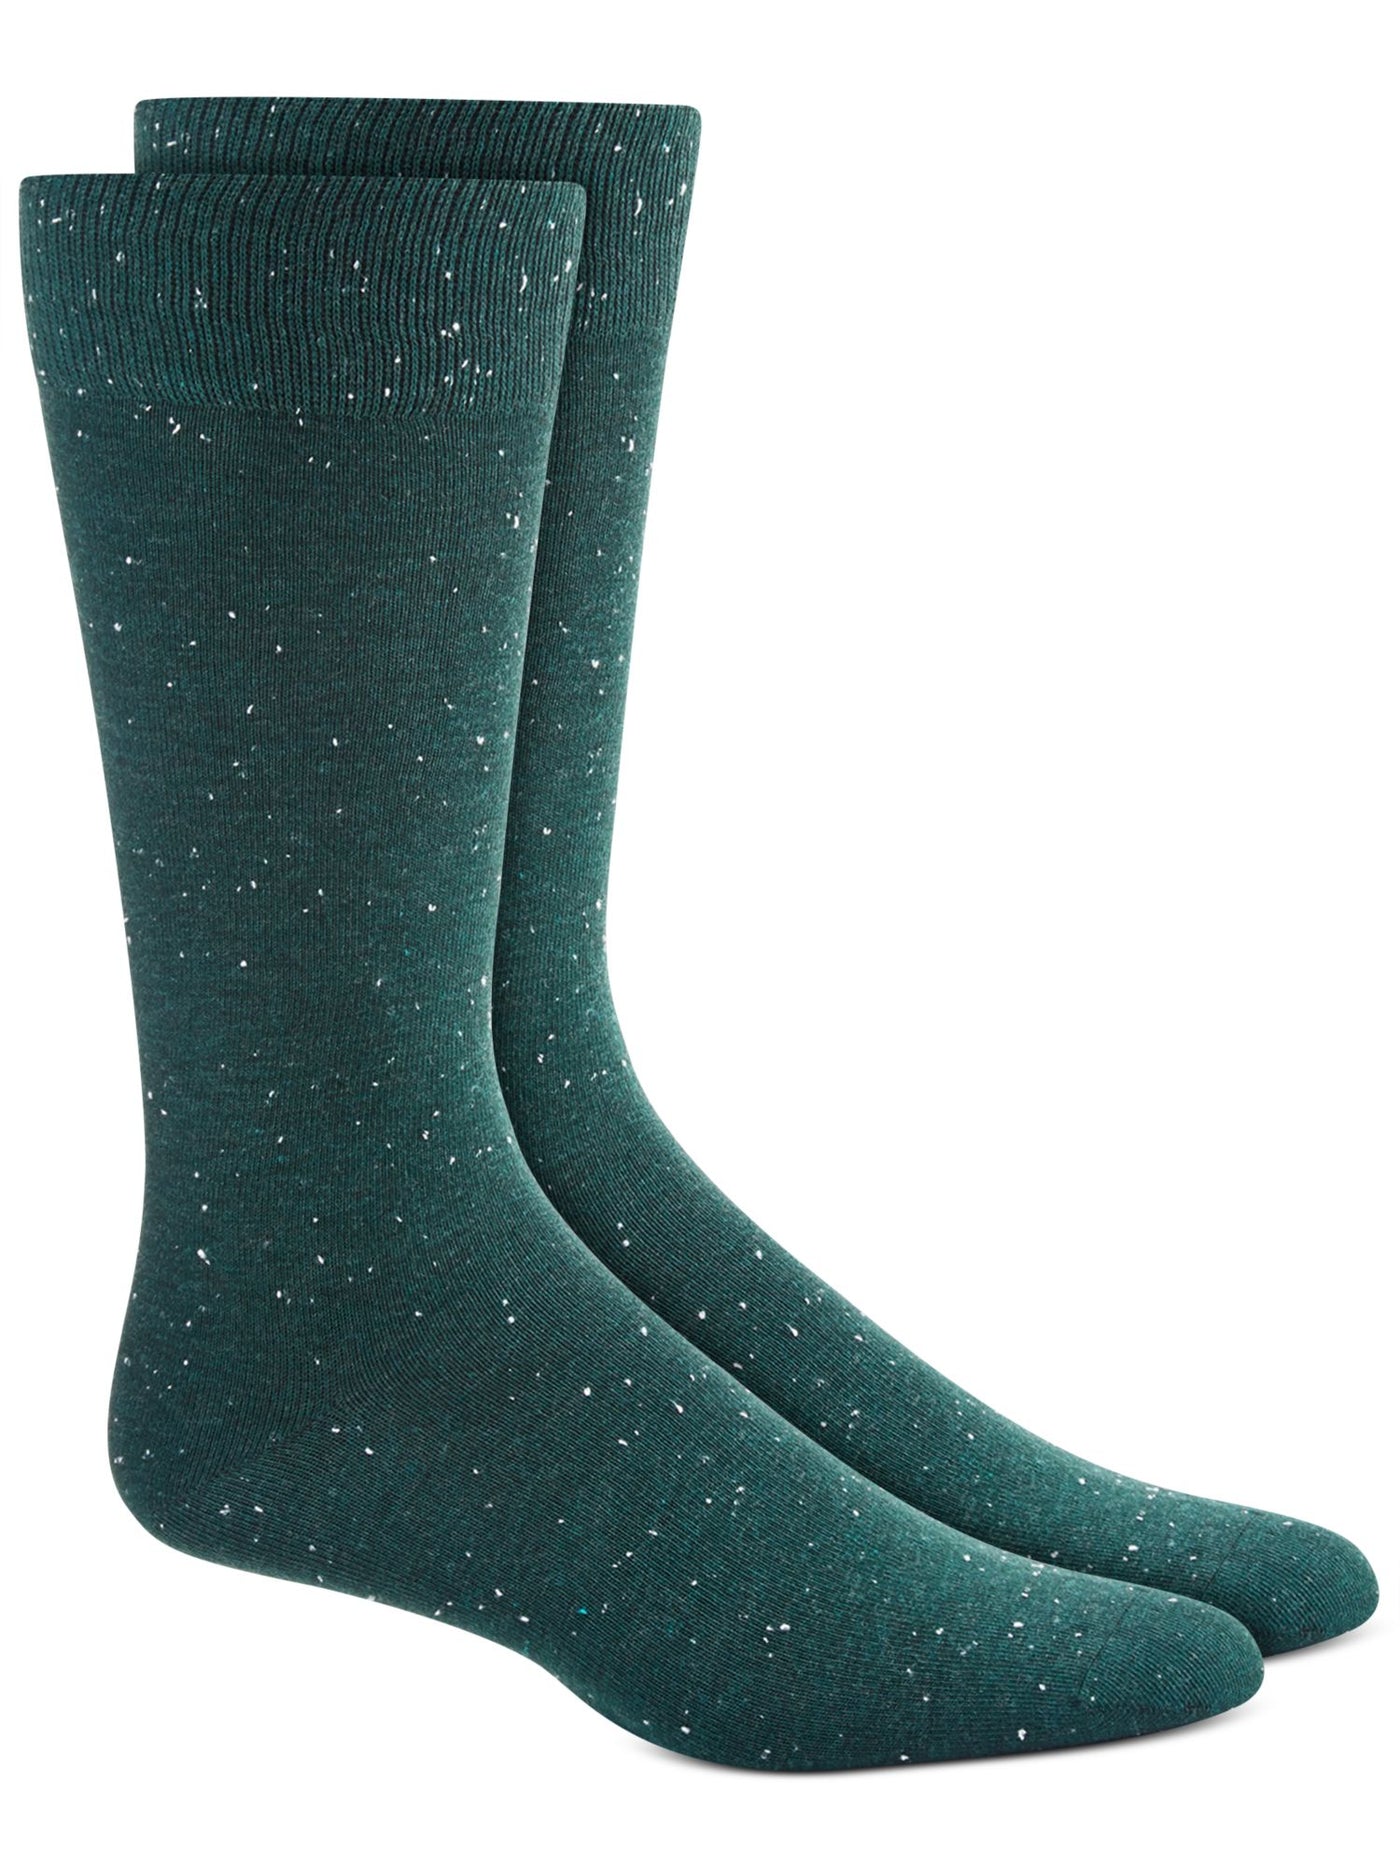 ALFATECH BY ALFANI Mens Green Rayon Speckle Moisture Wicking Casual Crew Socks 7-12